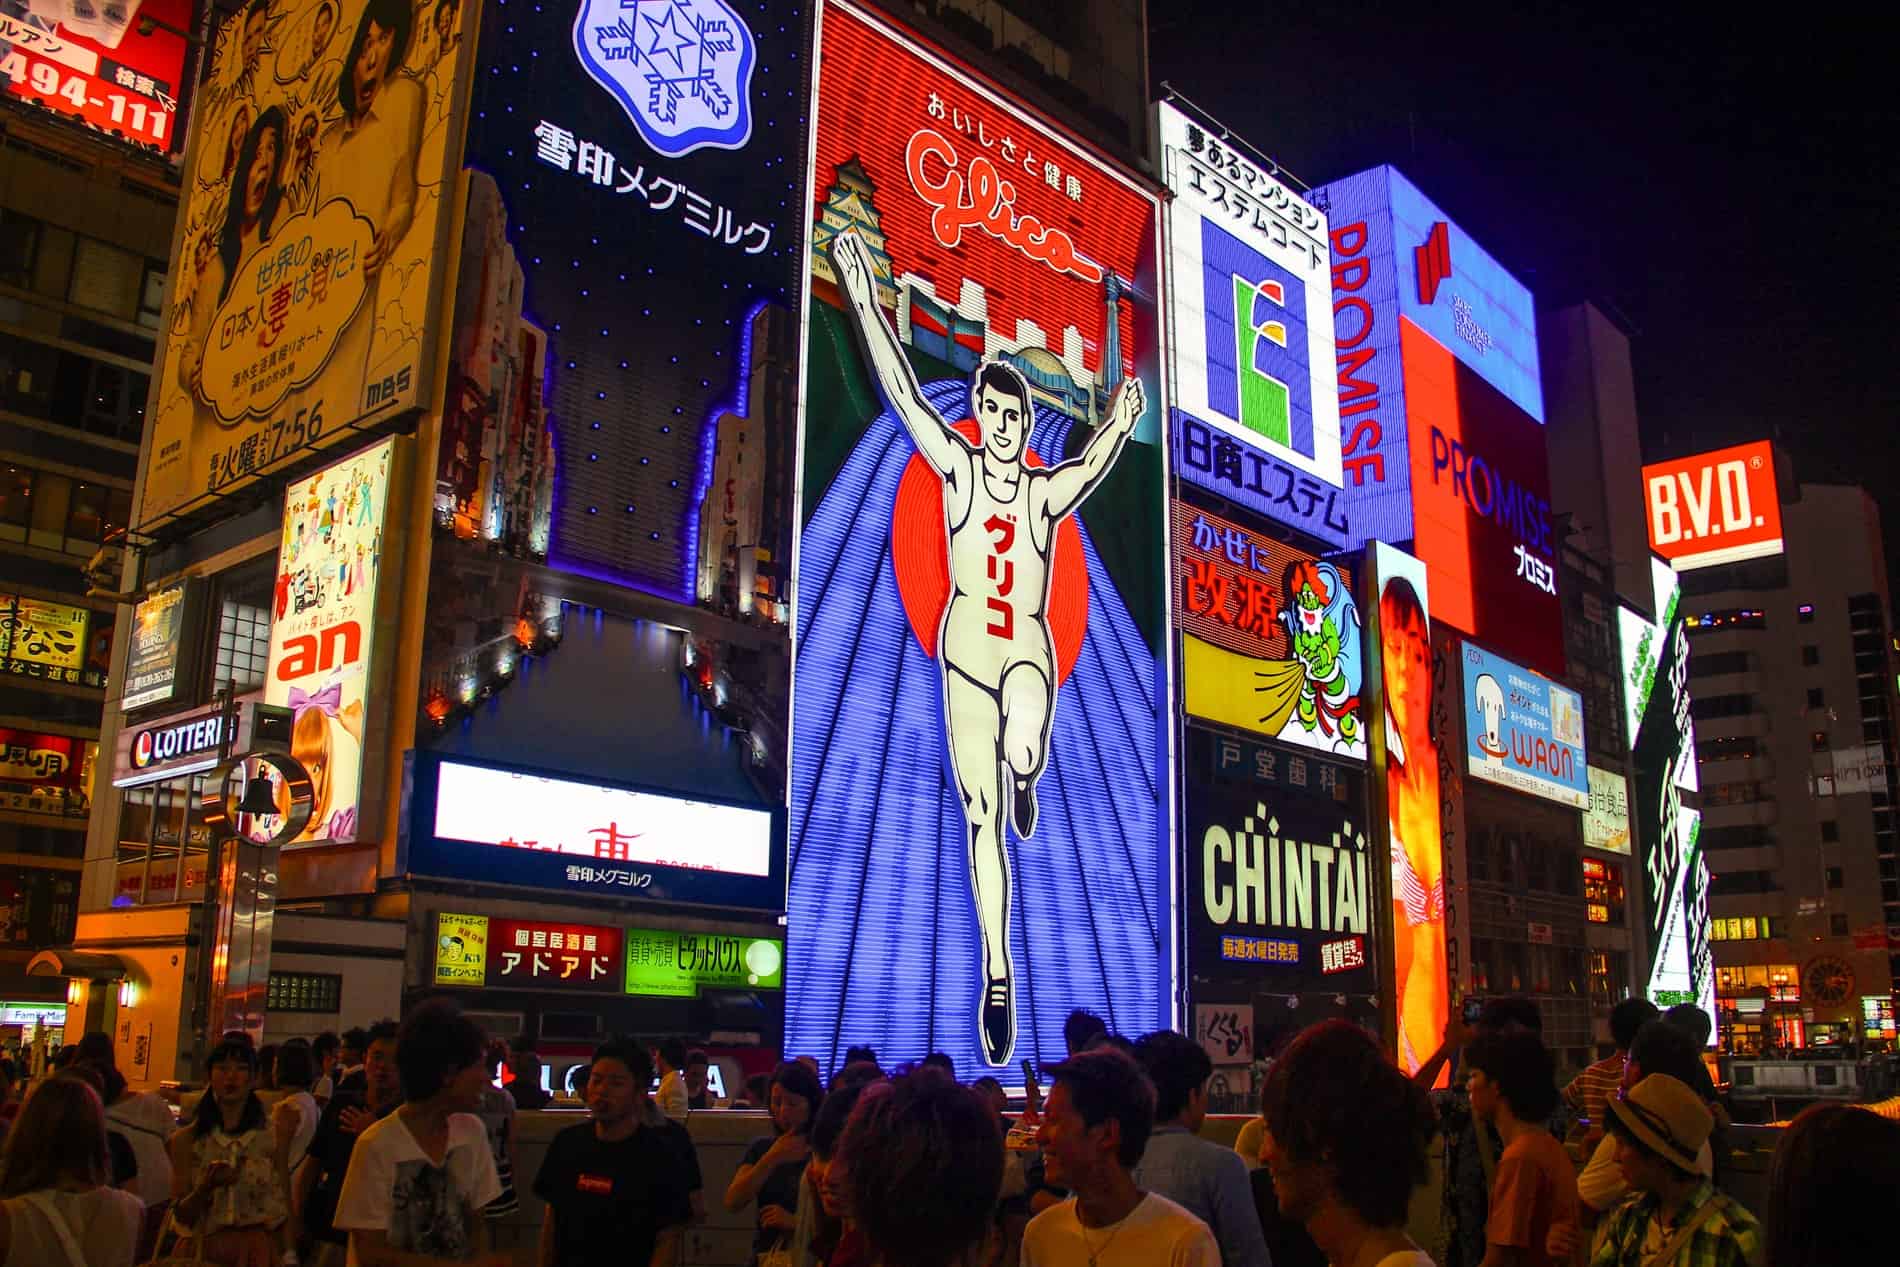 People gather in front of a building covered in animated advertising signs in Osaka, with the famous Glico Running Man sign in the middle.